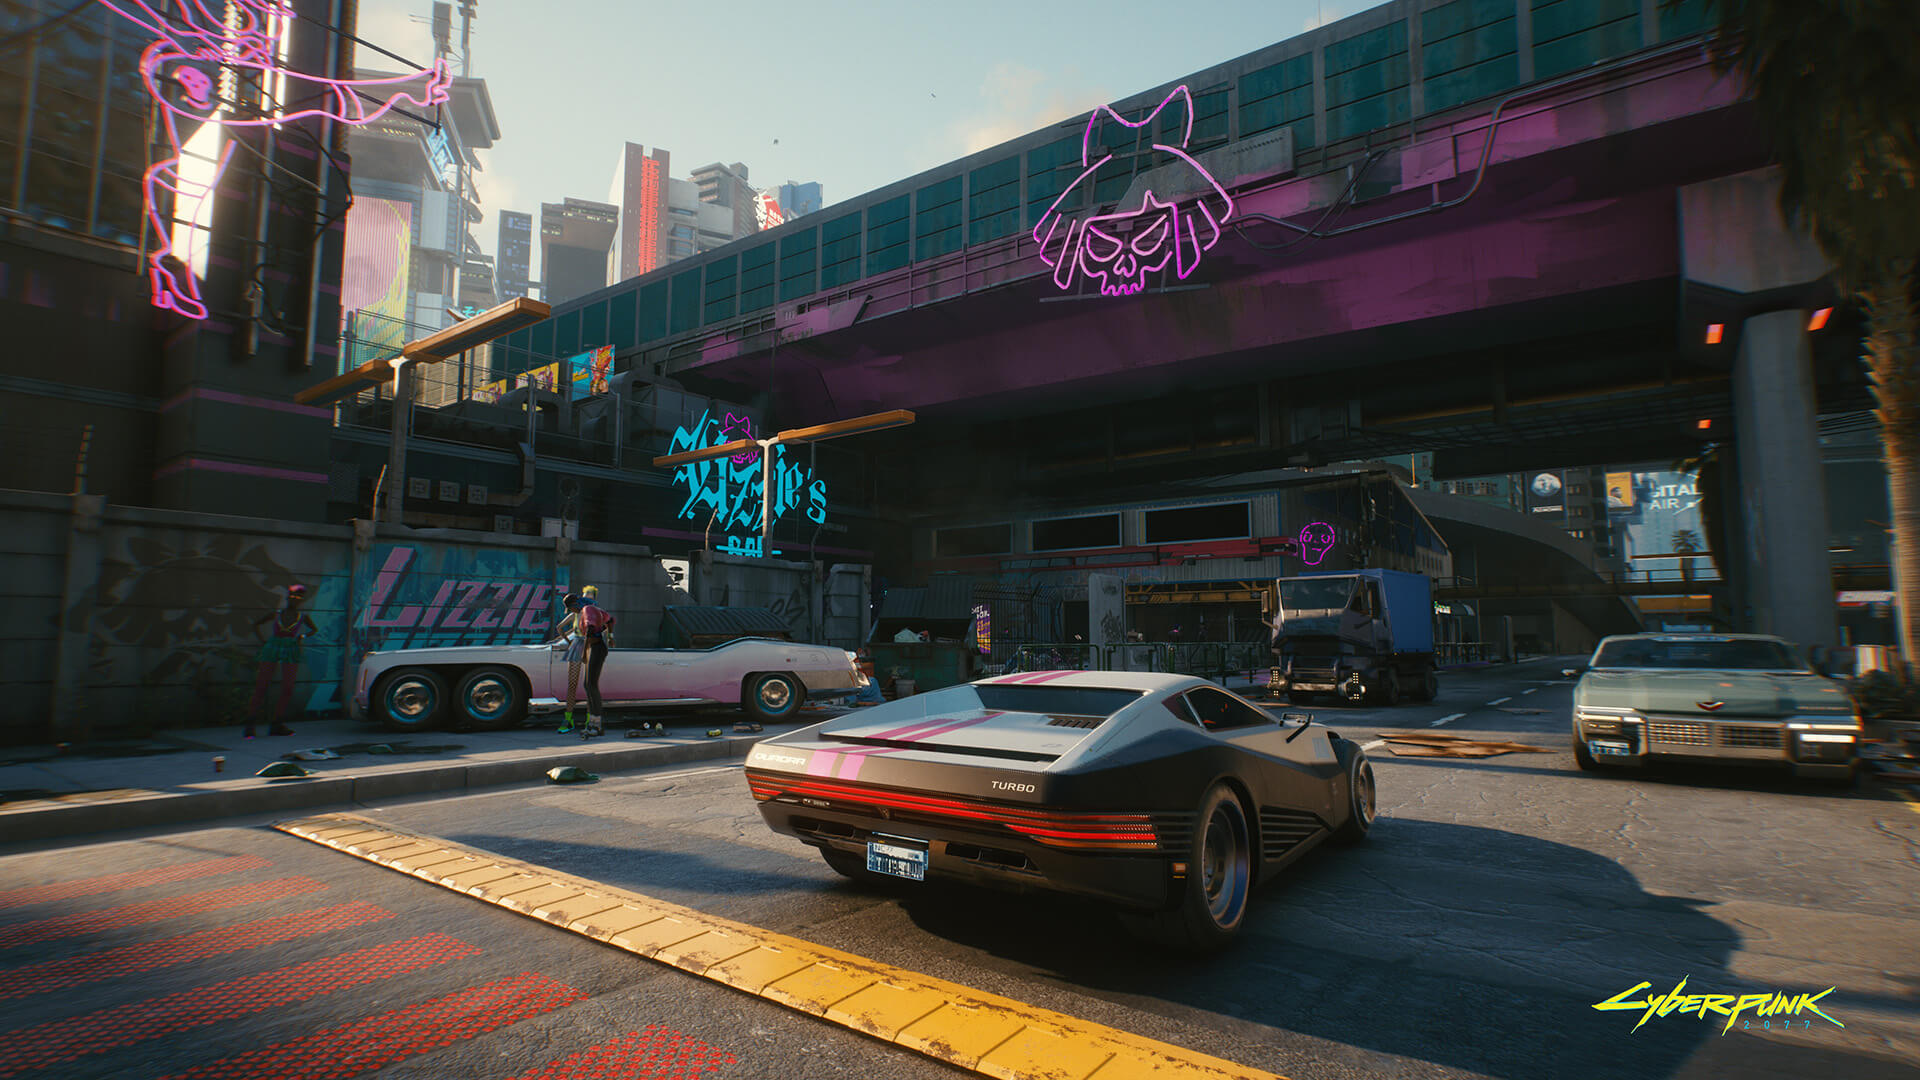 Cyberpunk 2077 Official Hi-Res Wallpaper Released by CD Projekt Red